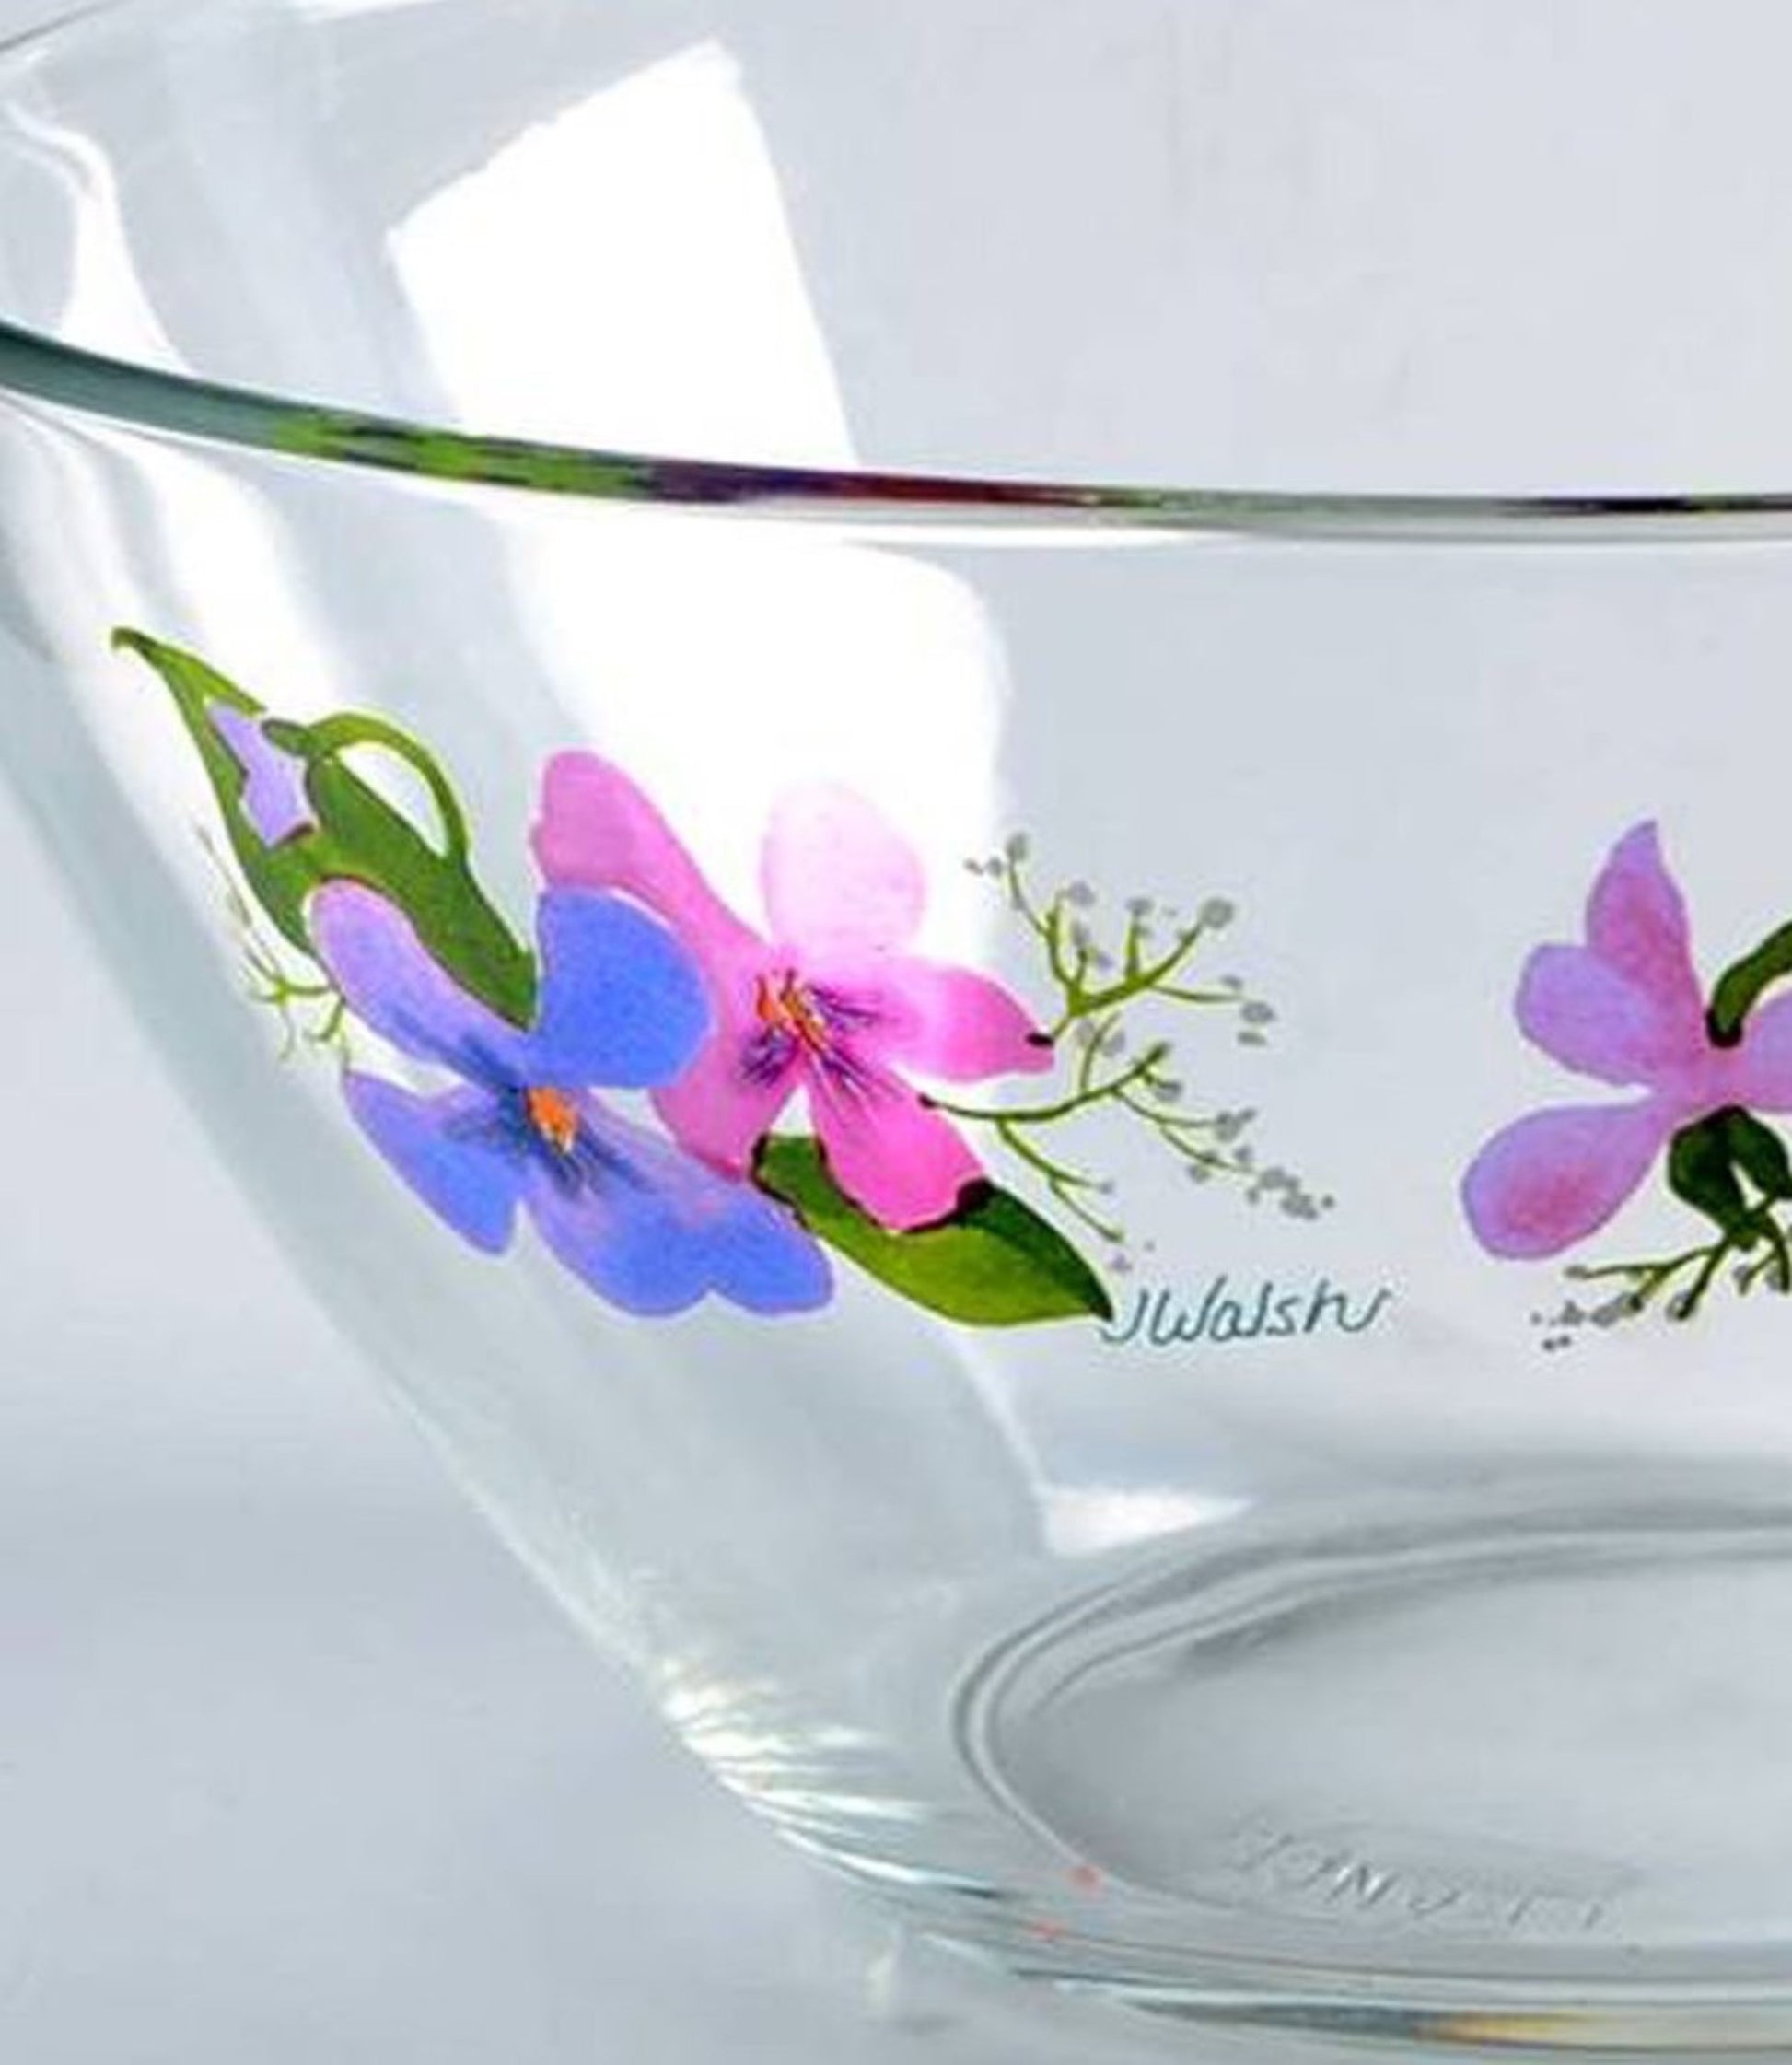 WILD VIOLETS COLLECTION By Avon Hand Painted Small Fruit Bowl Made in France 22K Gold